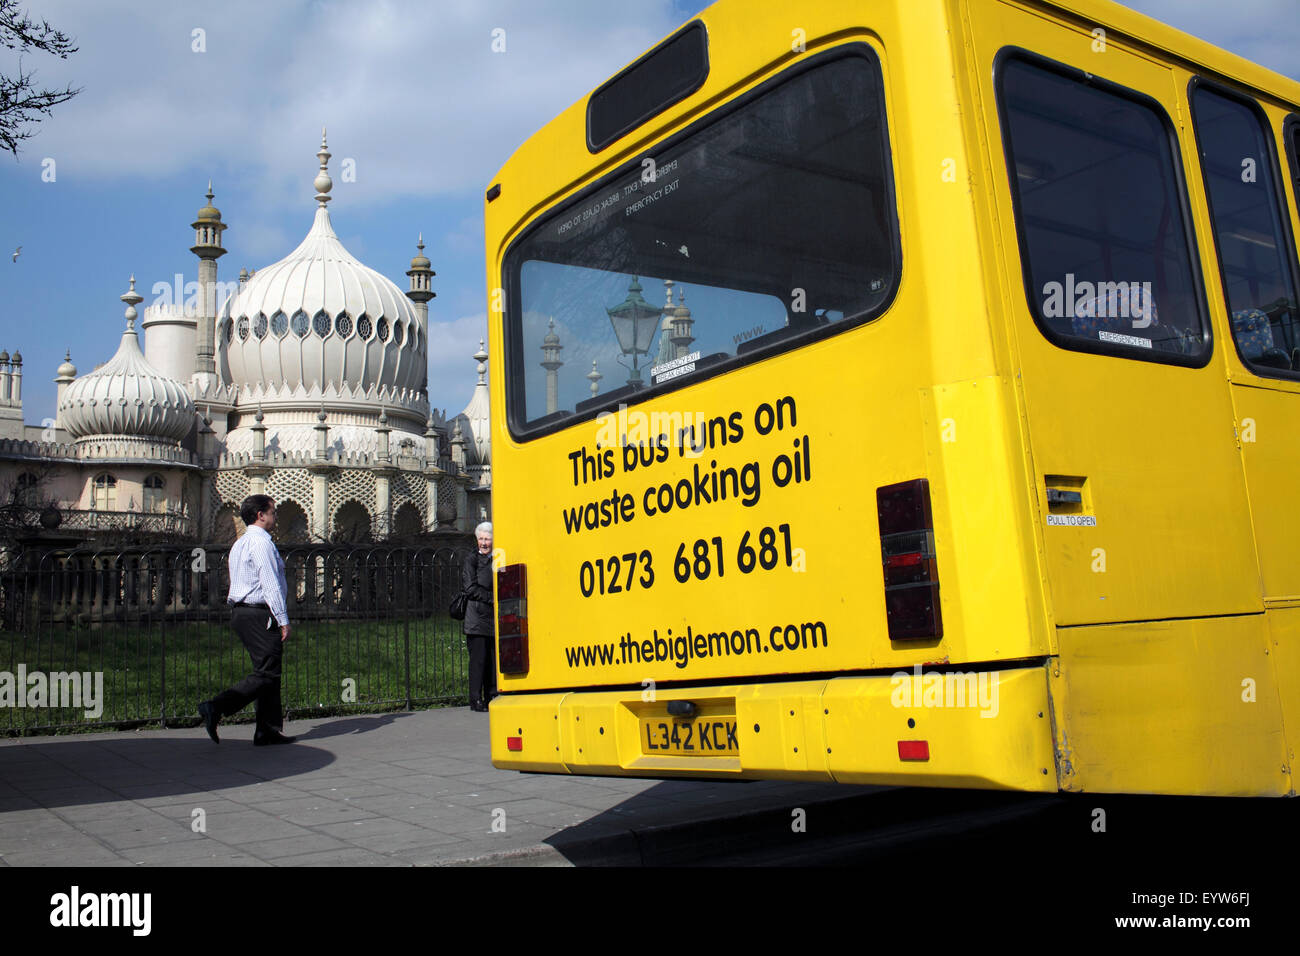 A bus that runs on biodiesel fuel made from recycled waste cooking oil, Brighton. Stock Photo